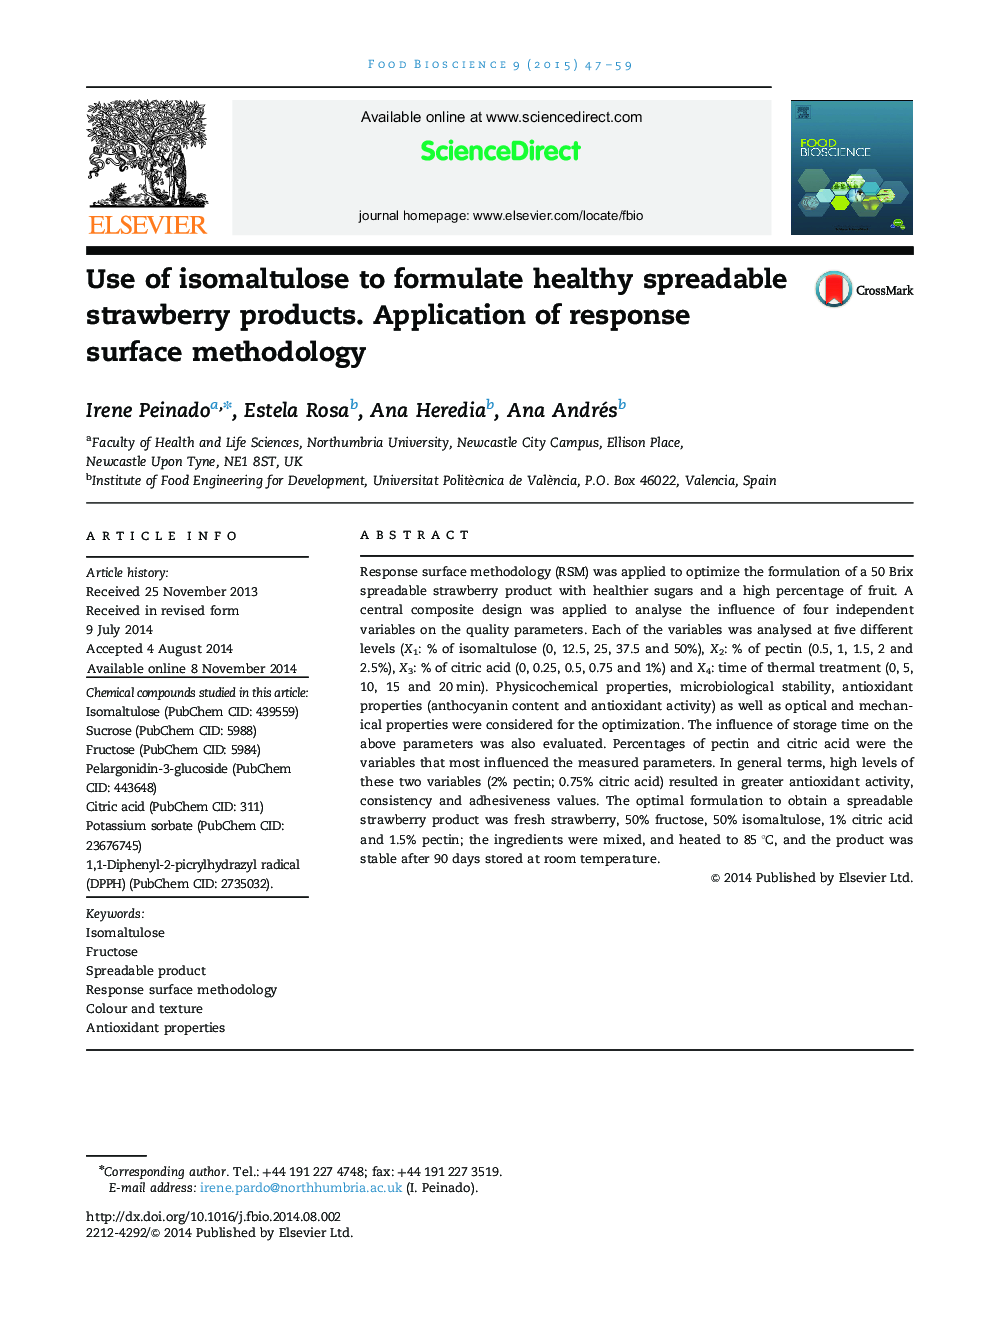 Use of isomaltulose to formulate healthy spreadable strawberry products. Application of response surface methodology